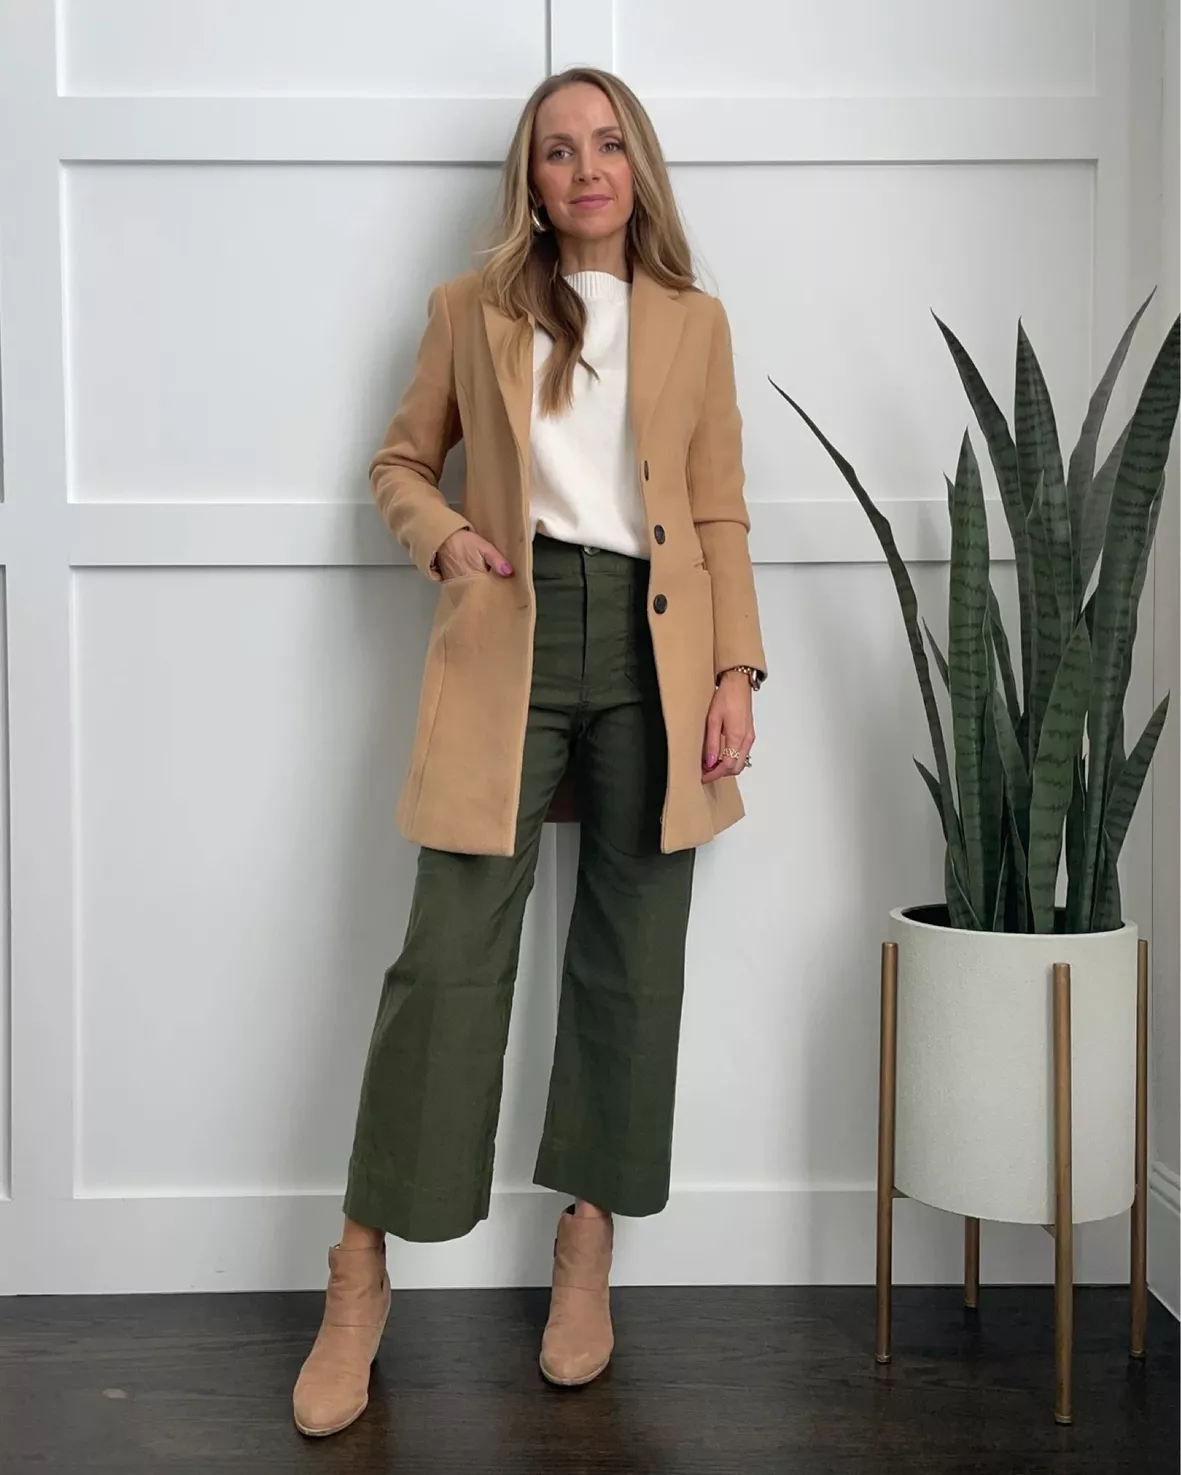 4 Cute Camel Coat Outfits for Fall and Winter - Merrick's Art